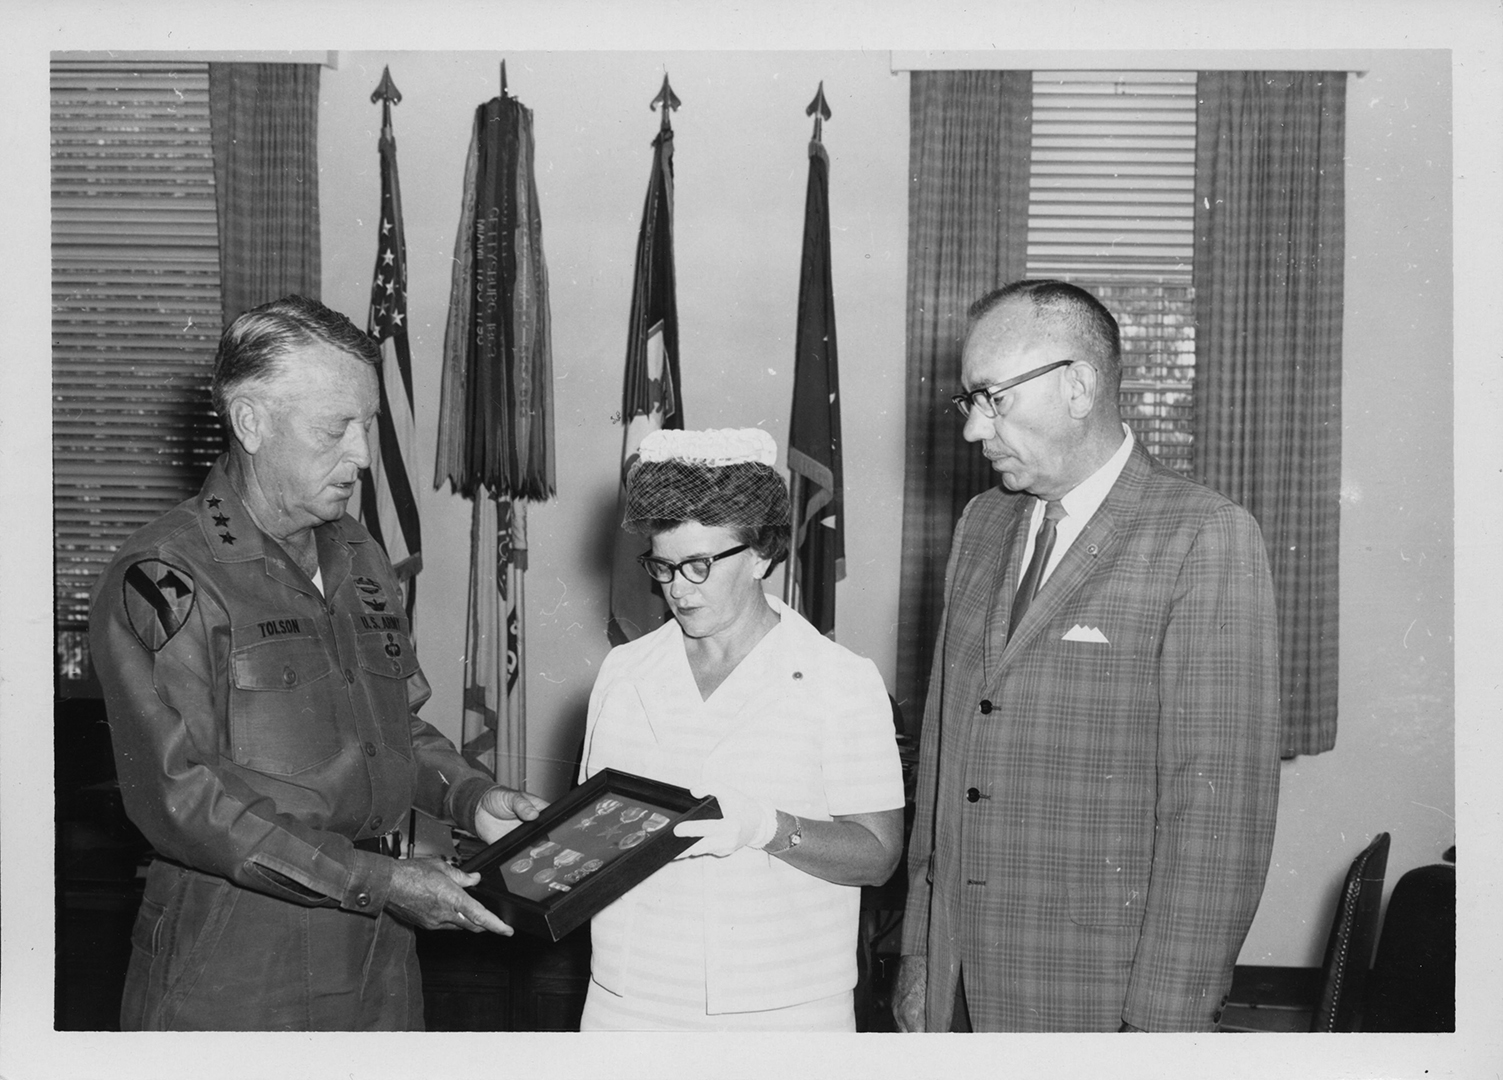 Lieutenant General John J. Tolson, Commanding
        General XVIII Airborne Corps, presents the Silver
        Star and Bronze Medal posthumously to Glanor
        Gay Best and Hugh Best Jr., who are receiving the
        medals on behalf of their deceased son, Hugh E.
        Best III, who was killed in action in 1969 in the
        Vietnam War. (Credit: C. Gene Tyree, 20 June 1969)